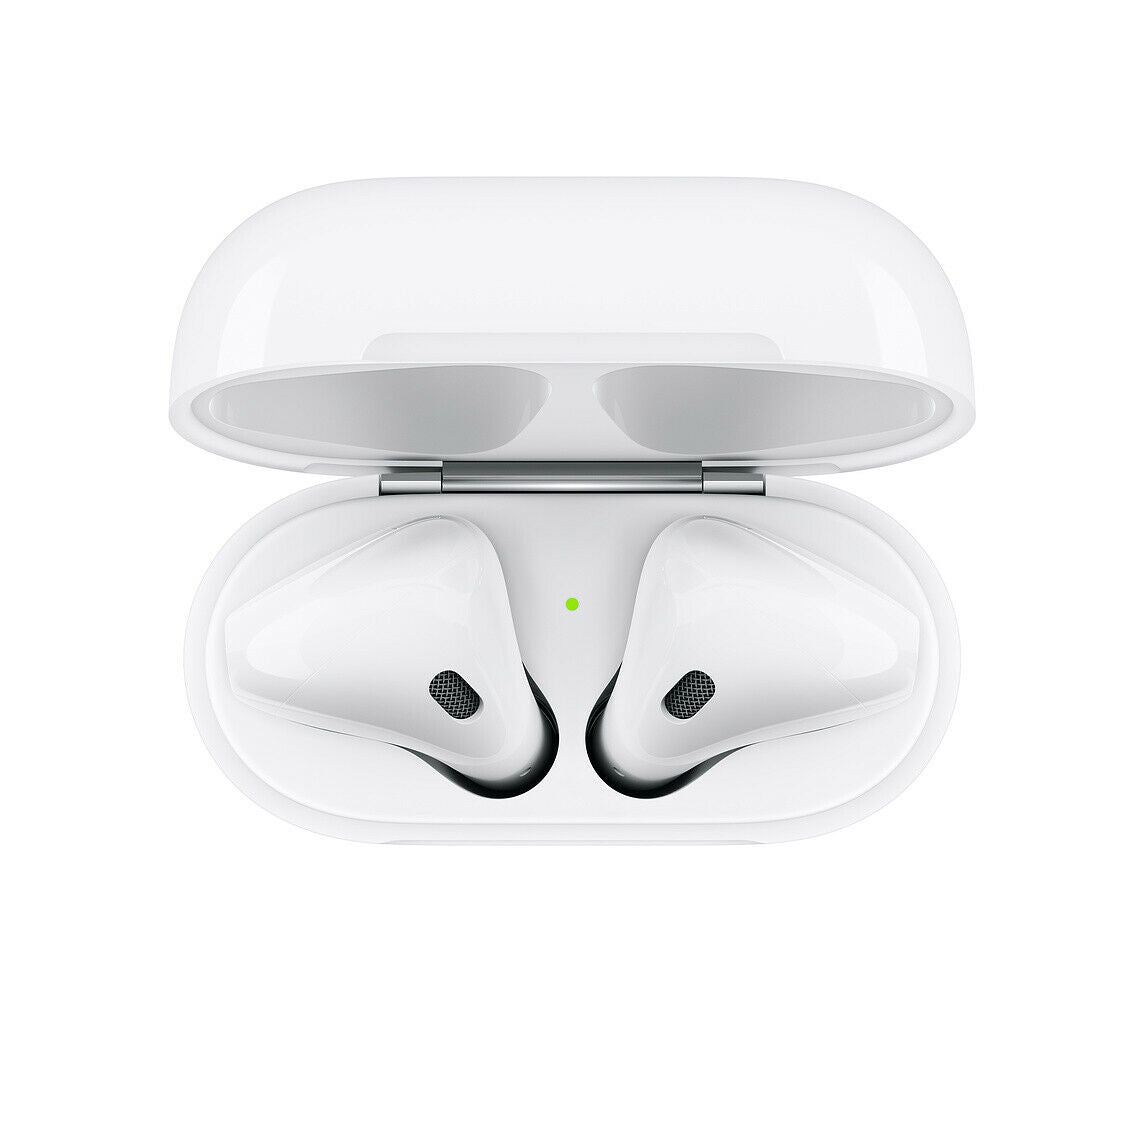 Apple AirPods 2nd Generation Bluetooth Headphones with Charge Case NEW